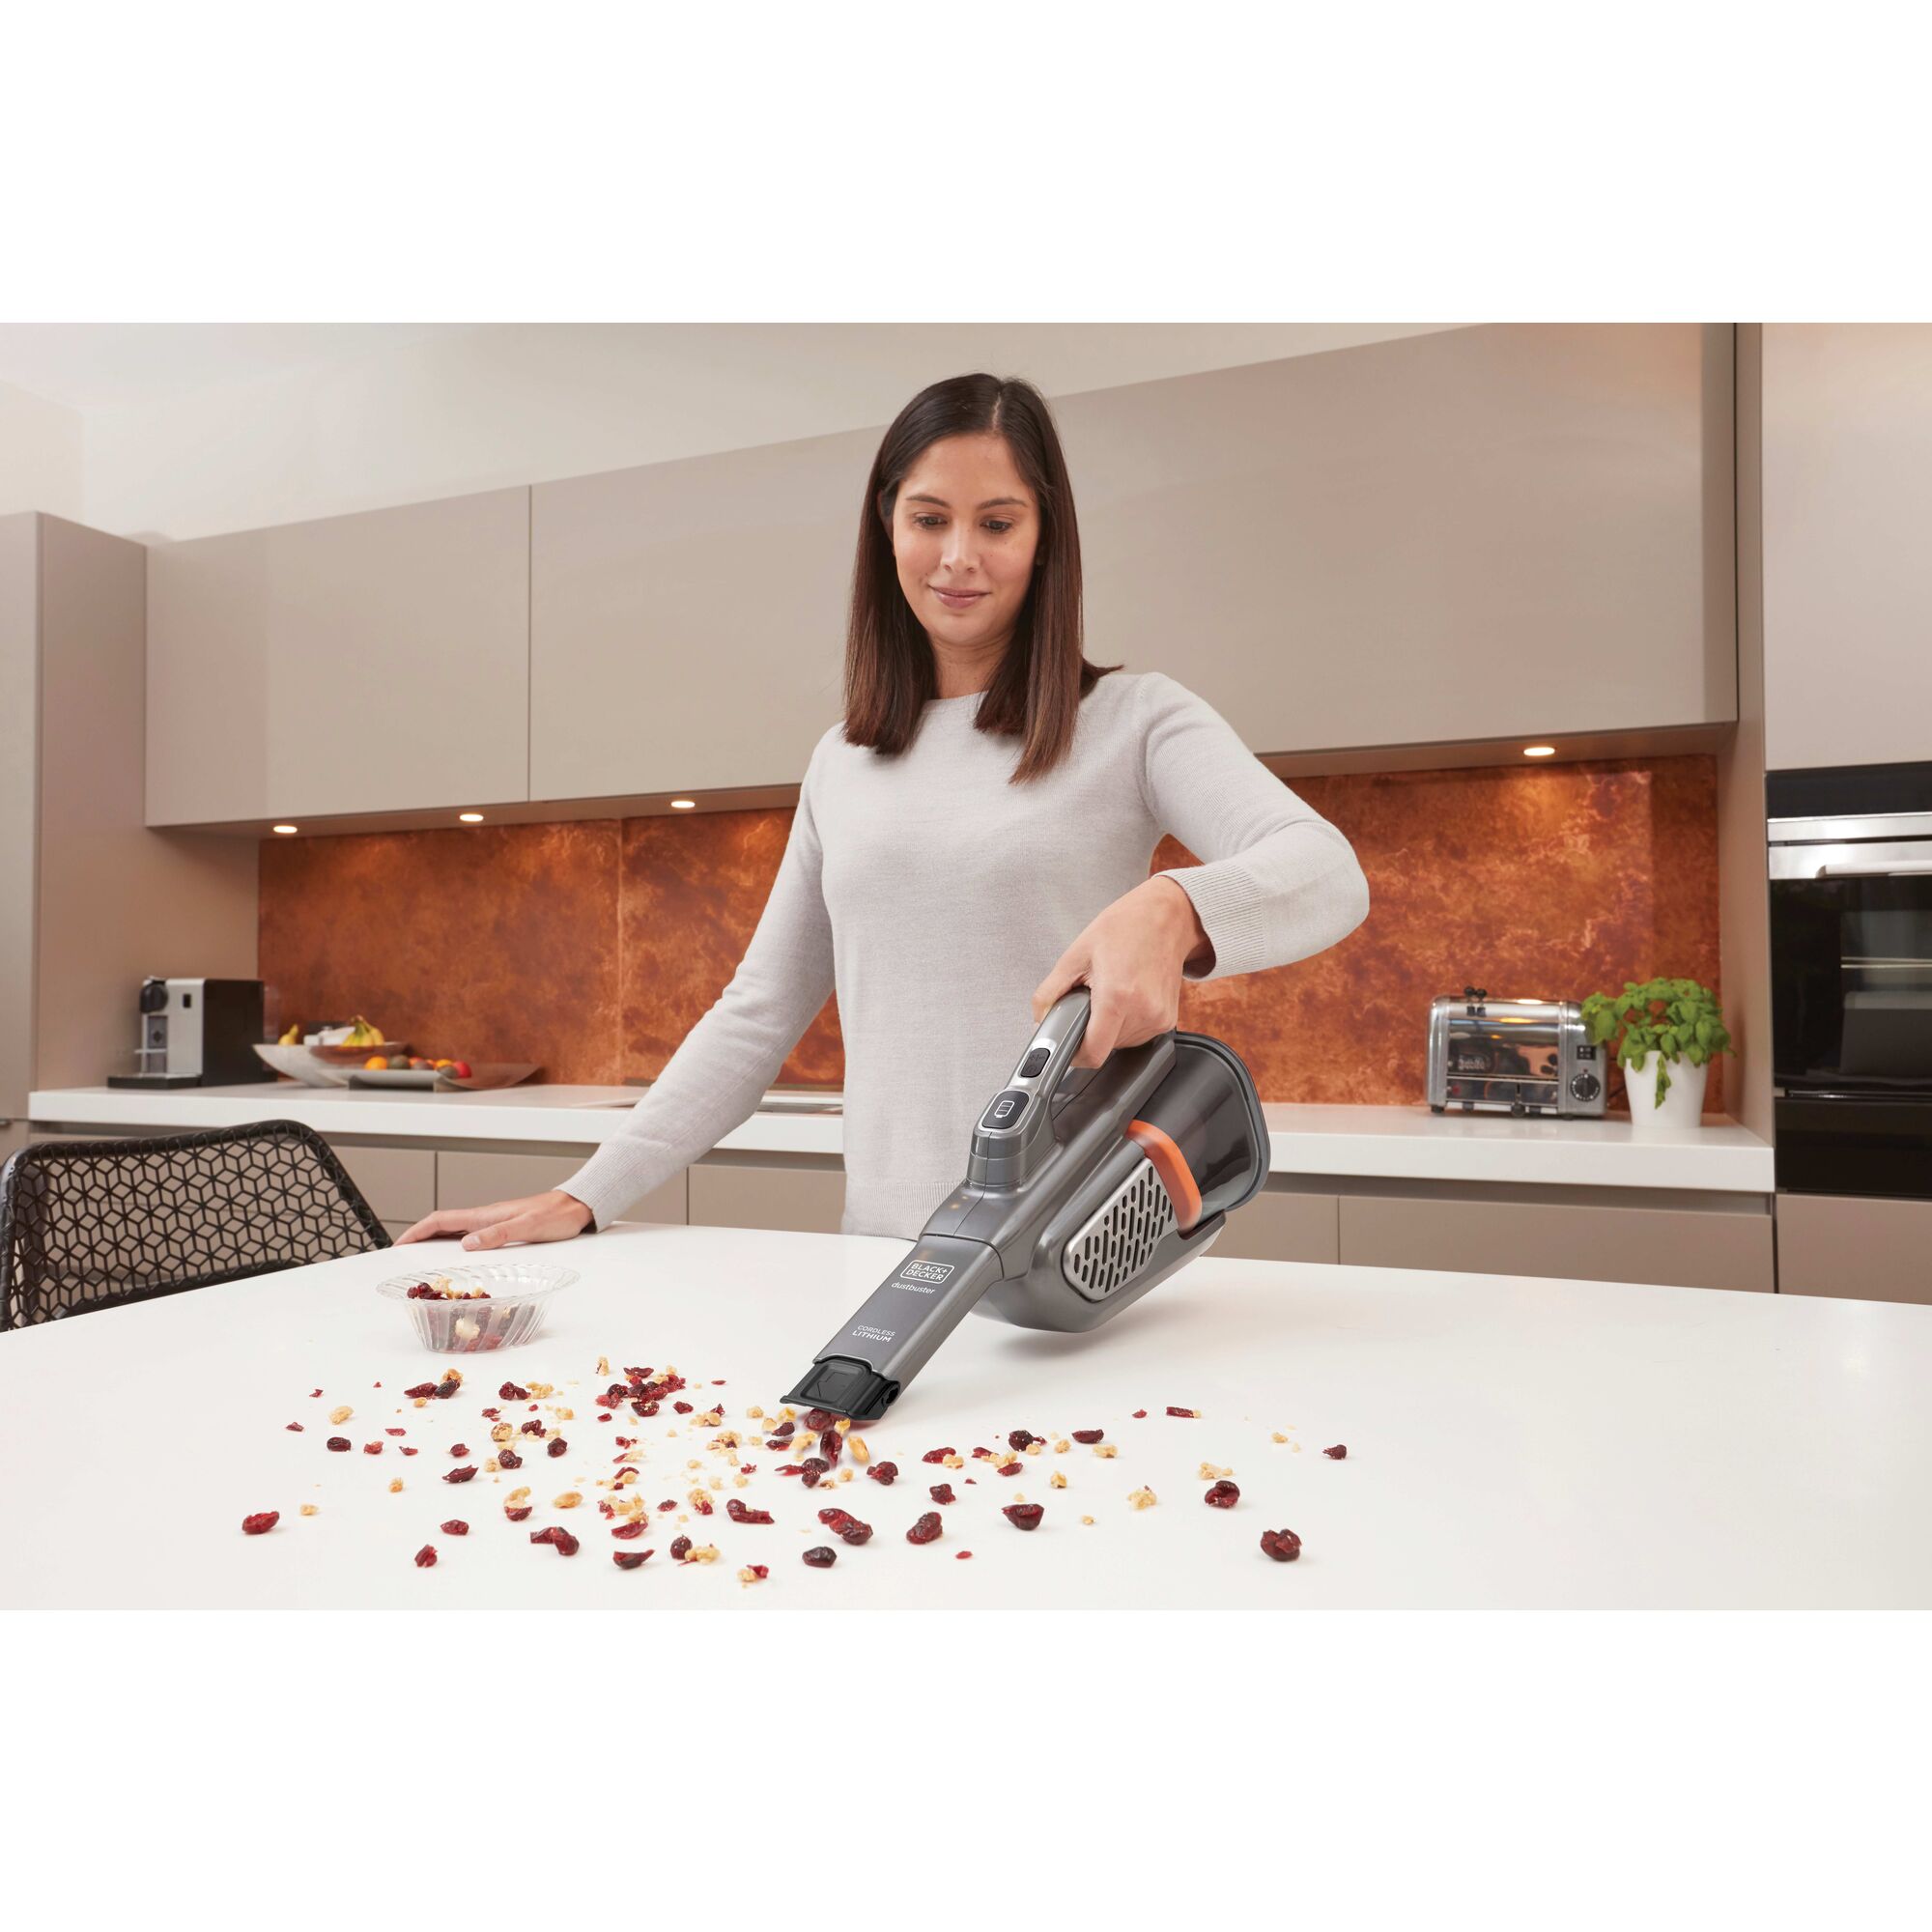 Dustbuster advanced clean plus hand vacuum being used by a person to clean mess on table.